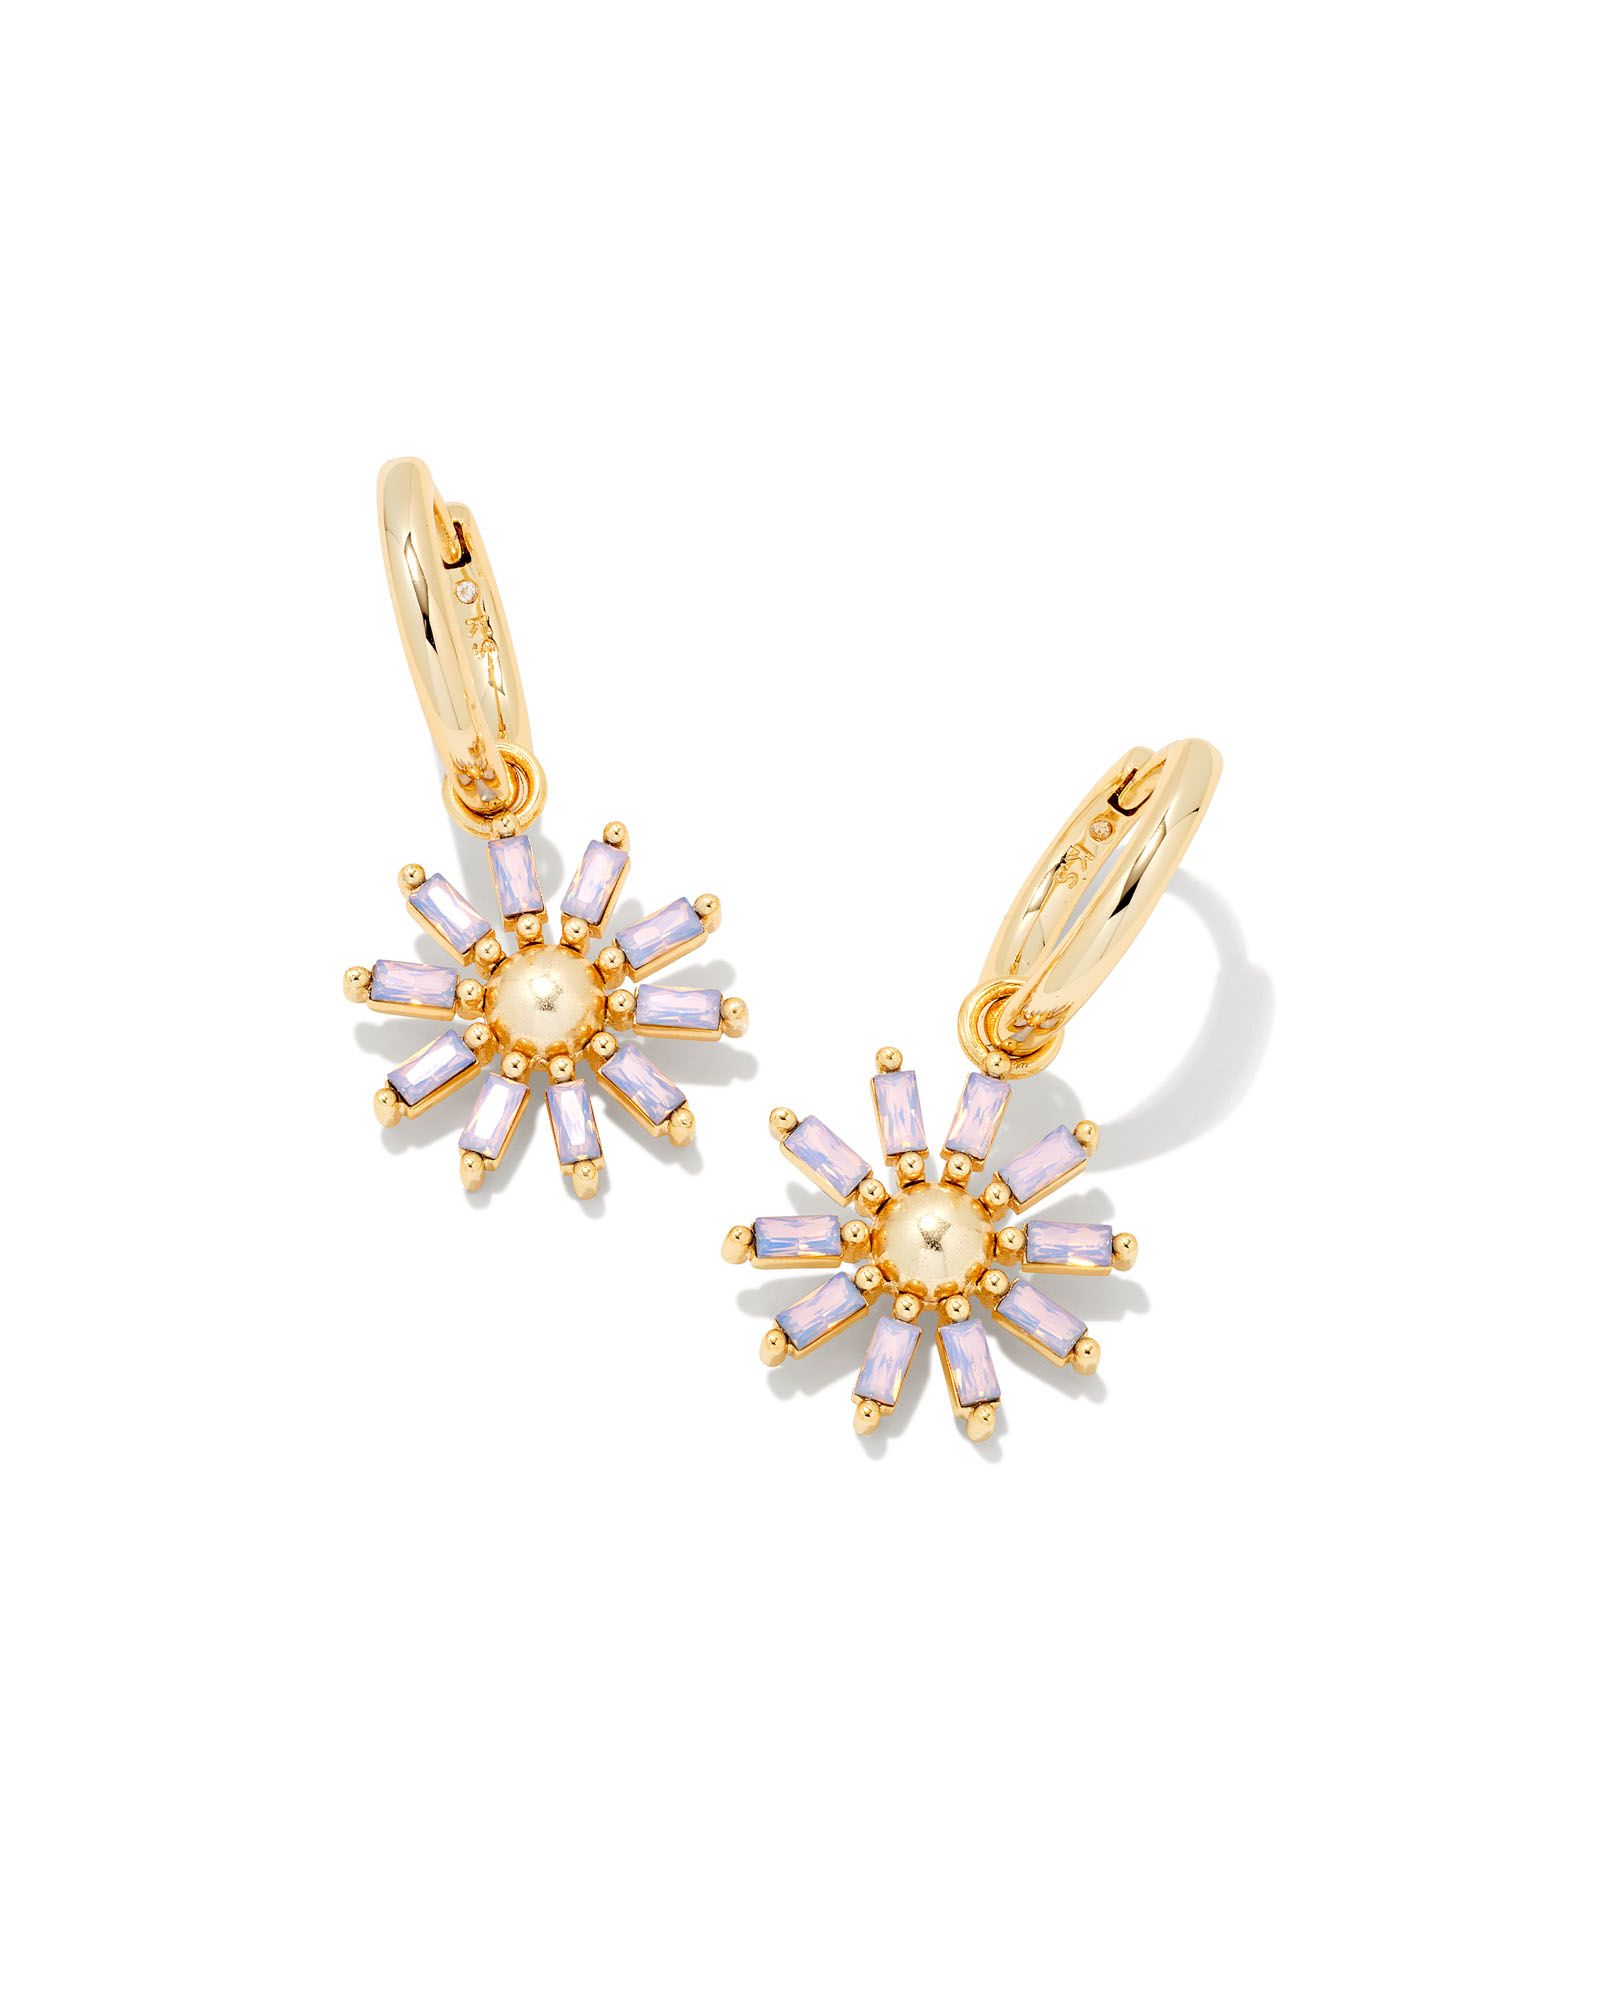 Madison Daisy Convertible Gold Huggie Earrings in White Opaque Glass | Kendra Scott